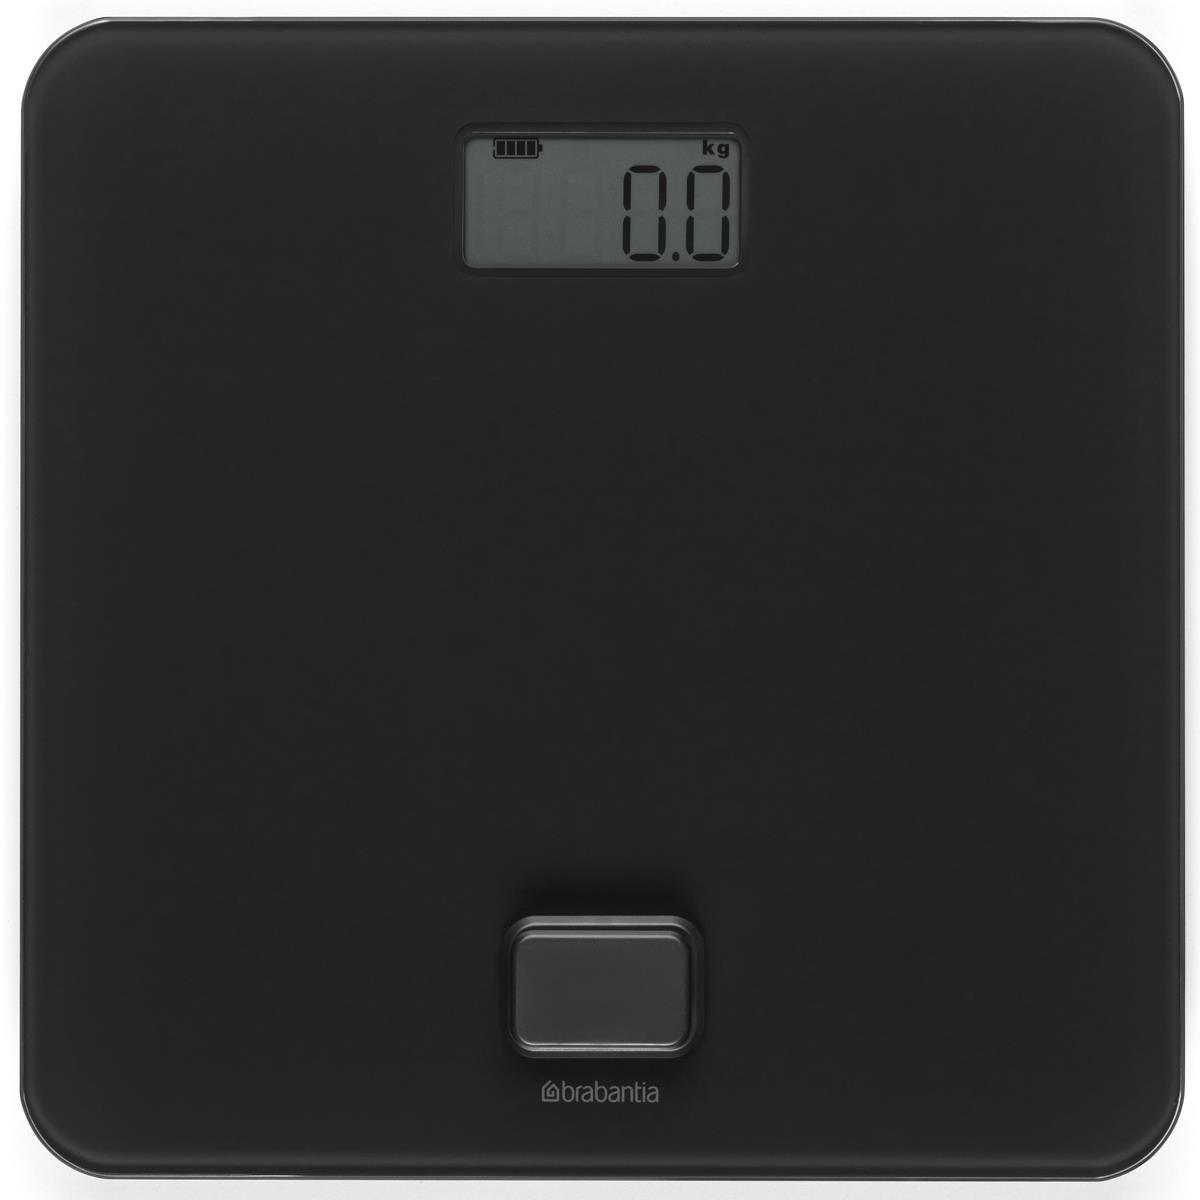 What battery for bathroom scales do I need?